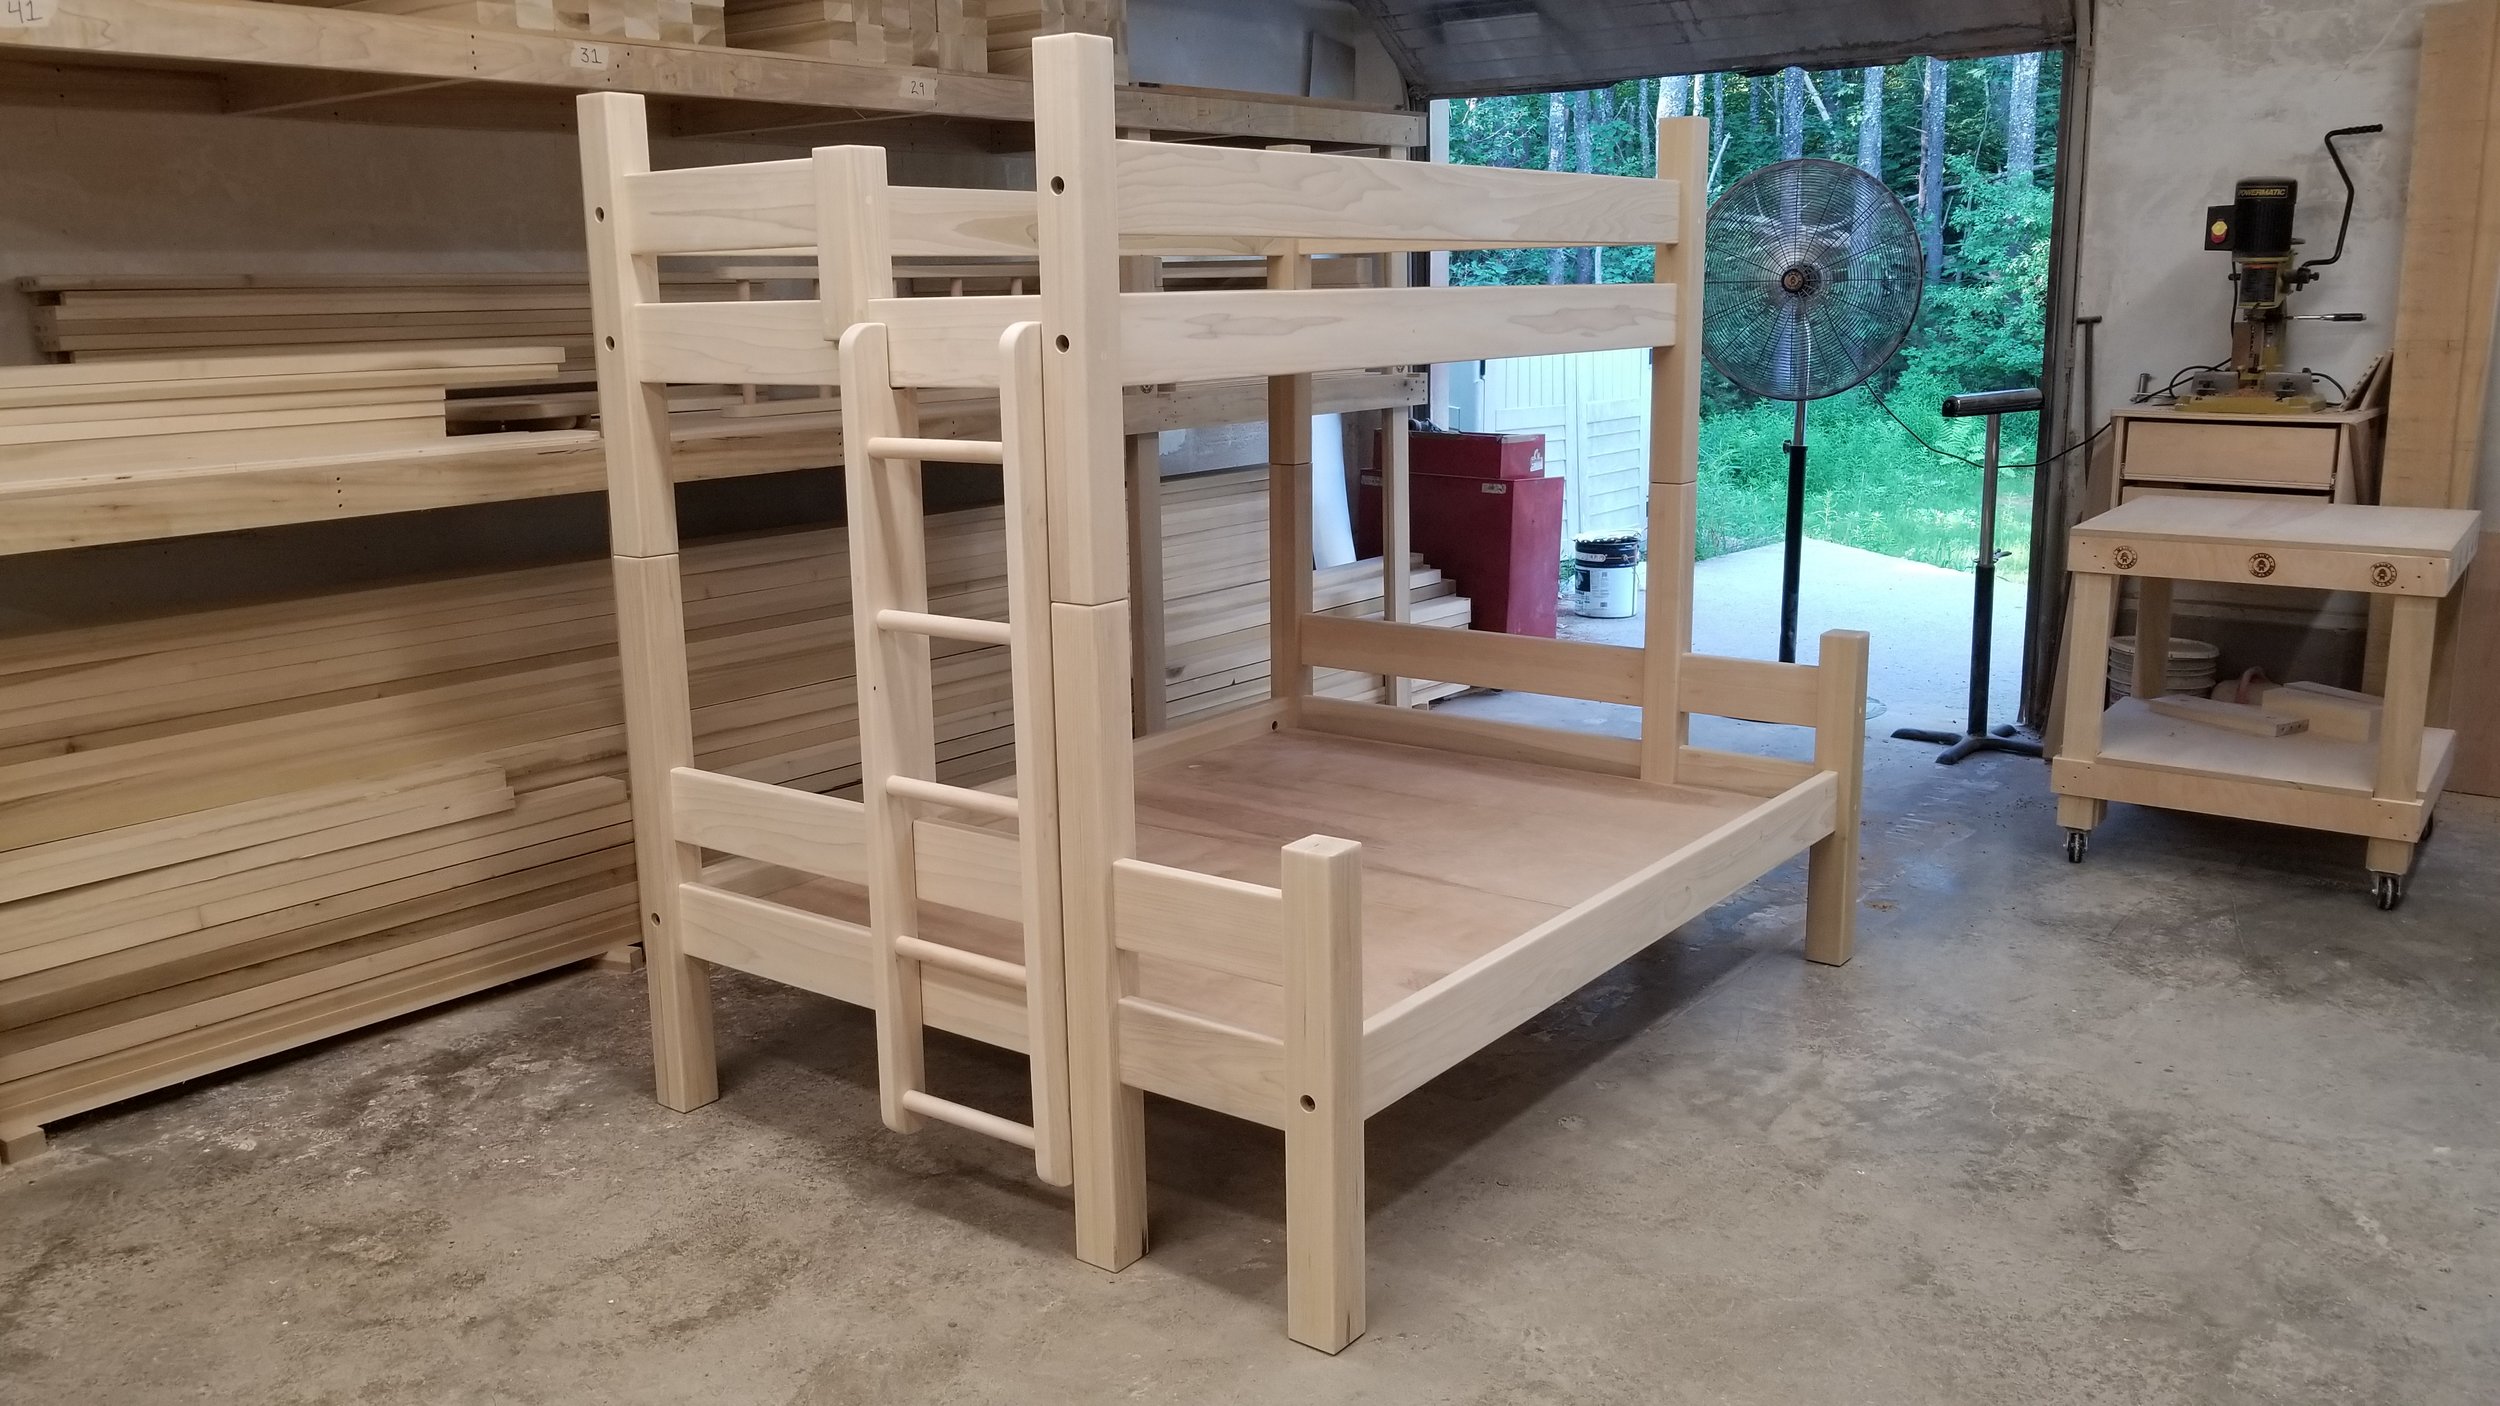 Unfinished Bunks Lofts, Bunk Bed Kits